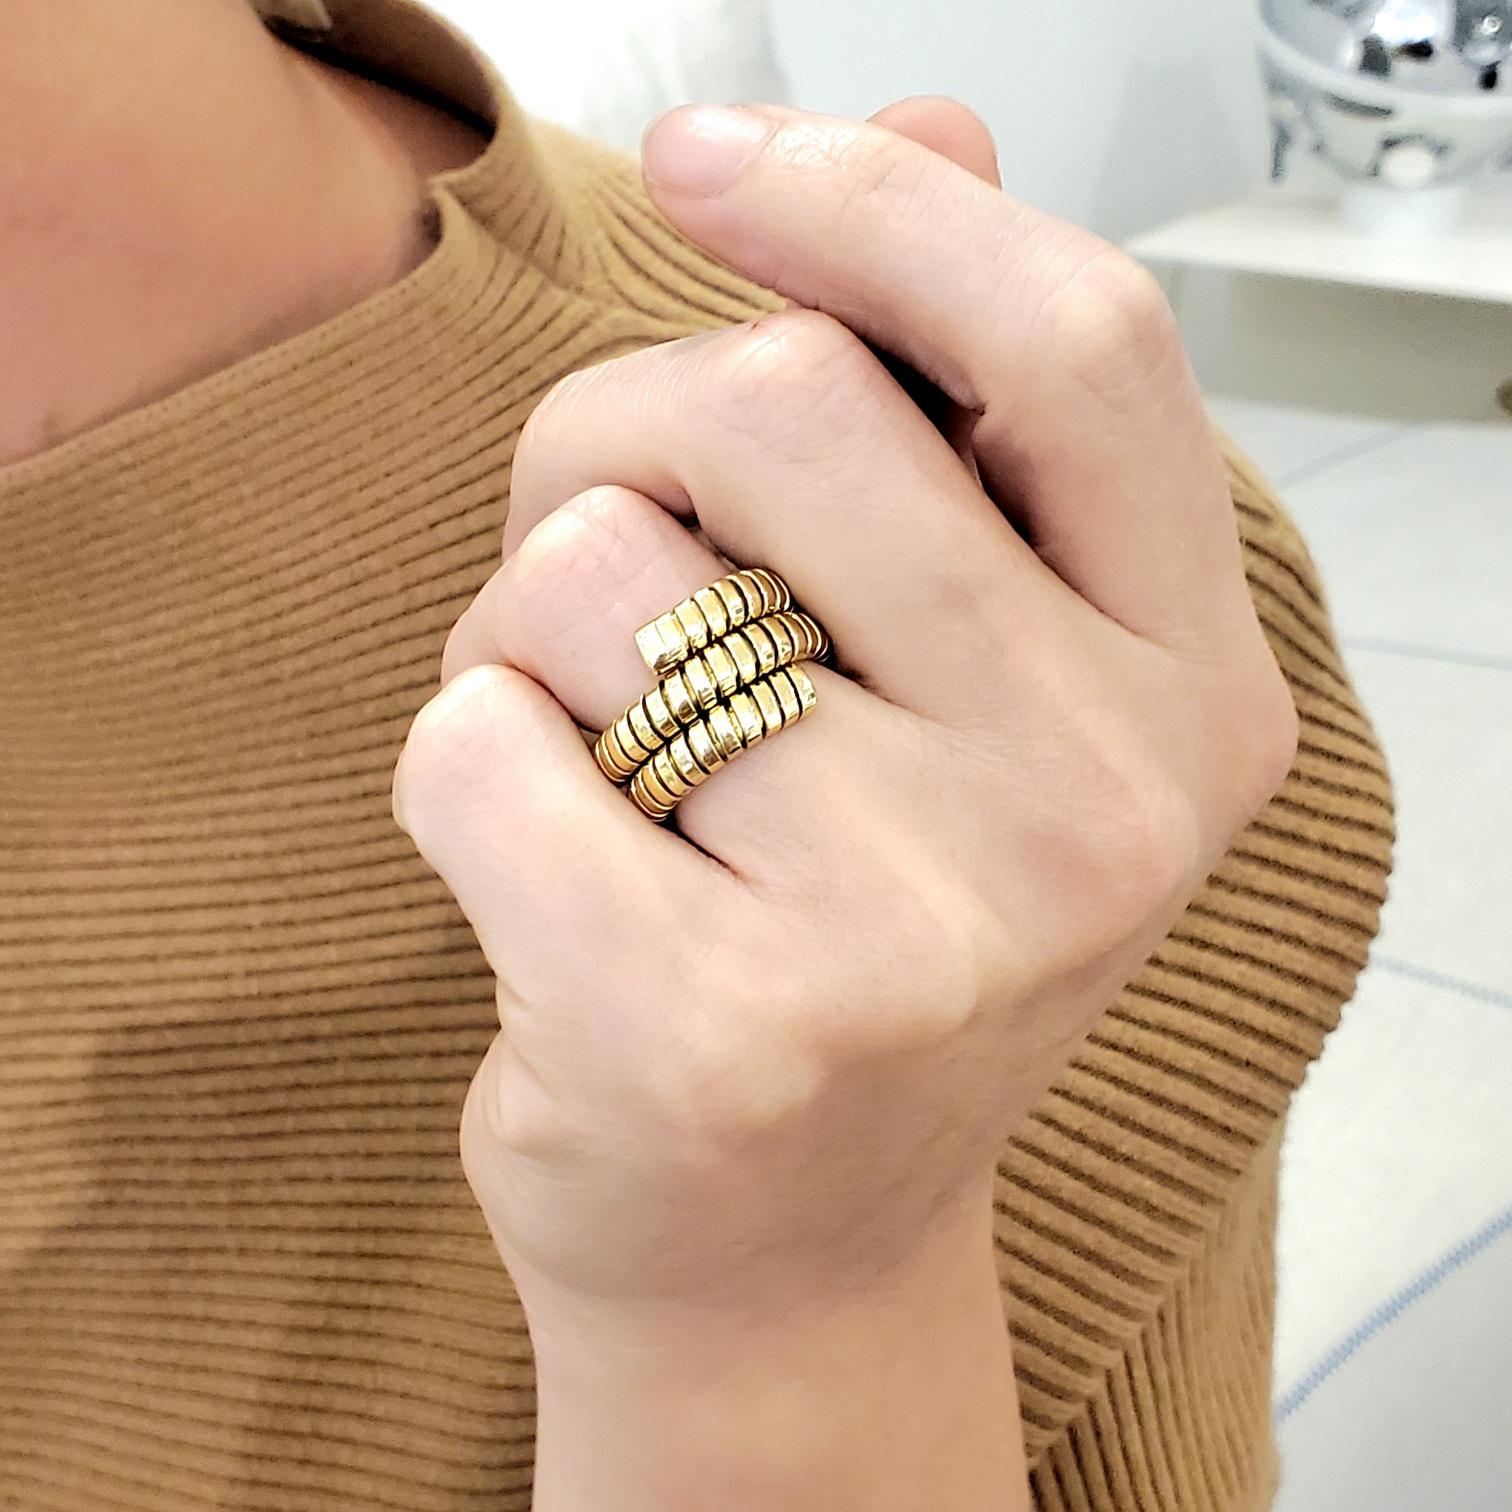 Tubogas serpenti ring designed by Bvlgari.

An iconic ring, created in Roma Italy by the jewelry house of Bvlgari. This popular spiral ring is from the Tubogas Serpenti collection and has been crafted in solid yellow gold of 18 karats with high